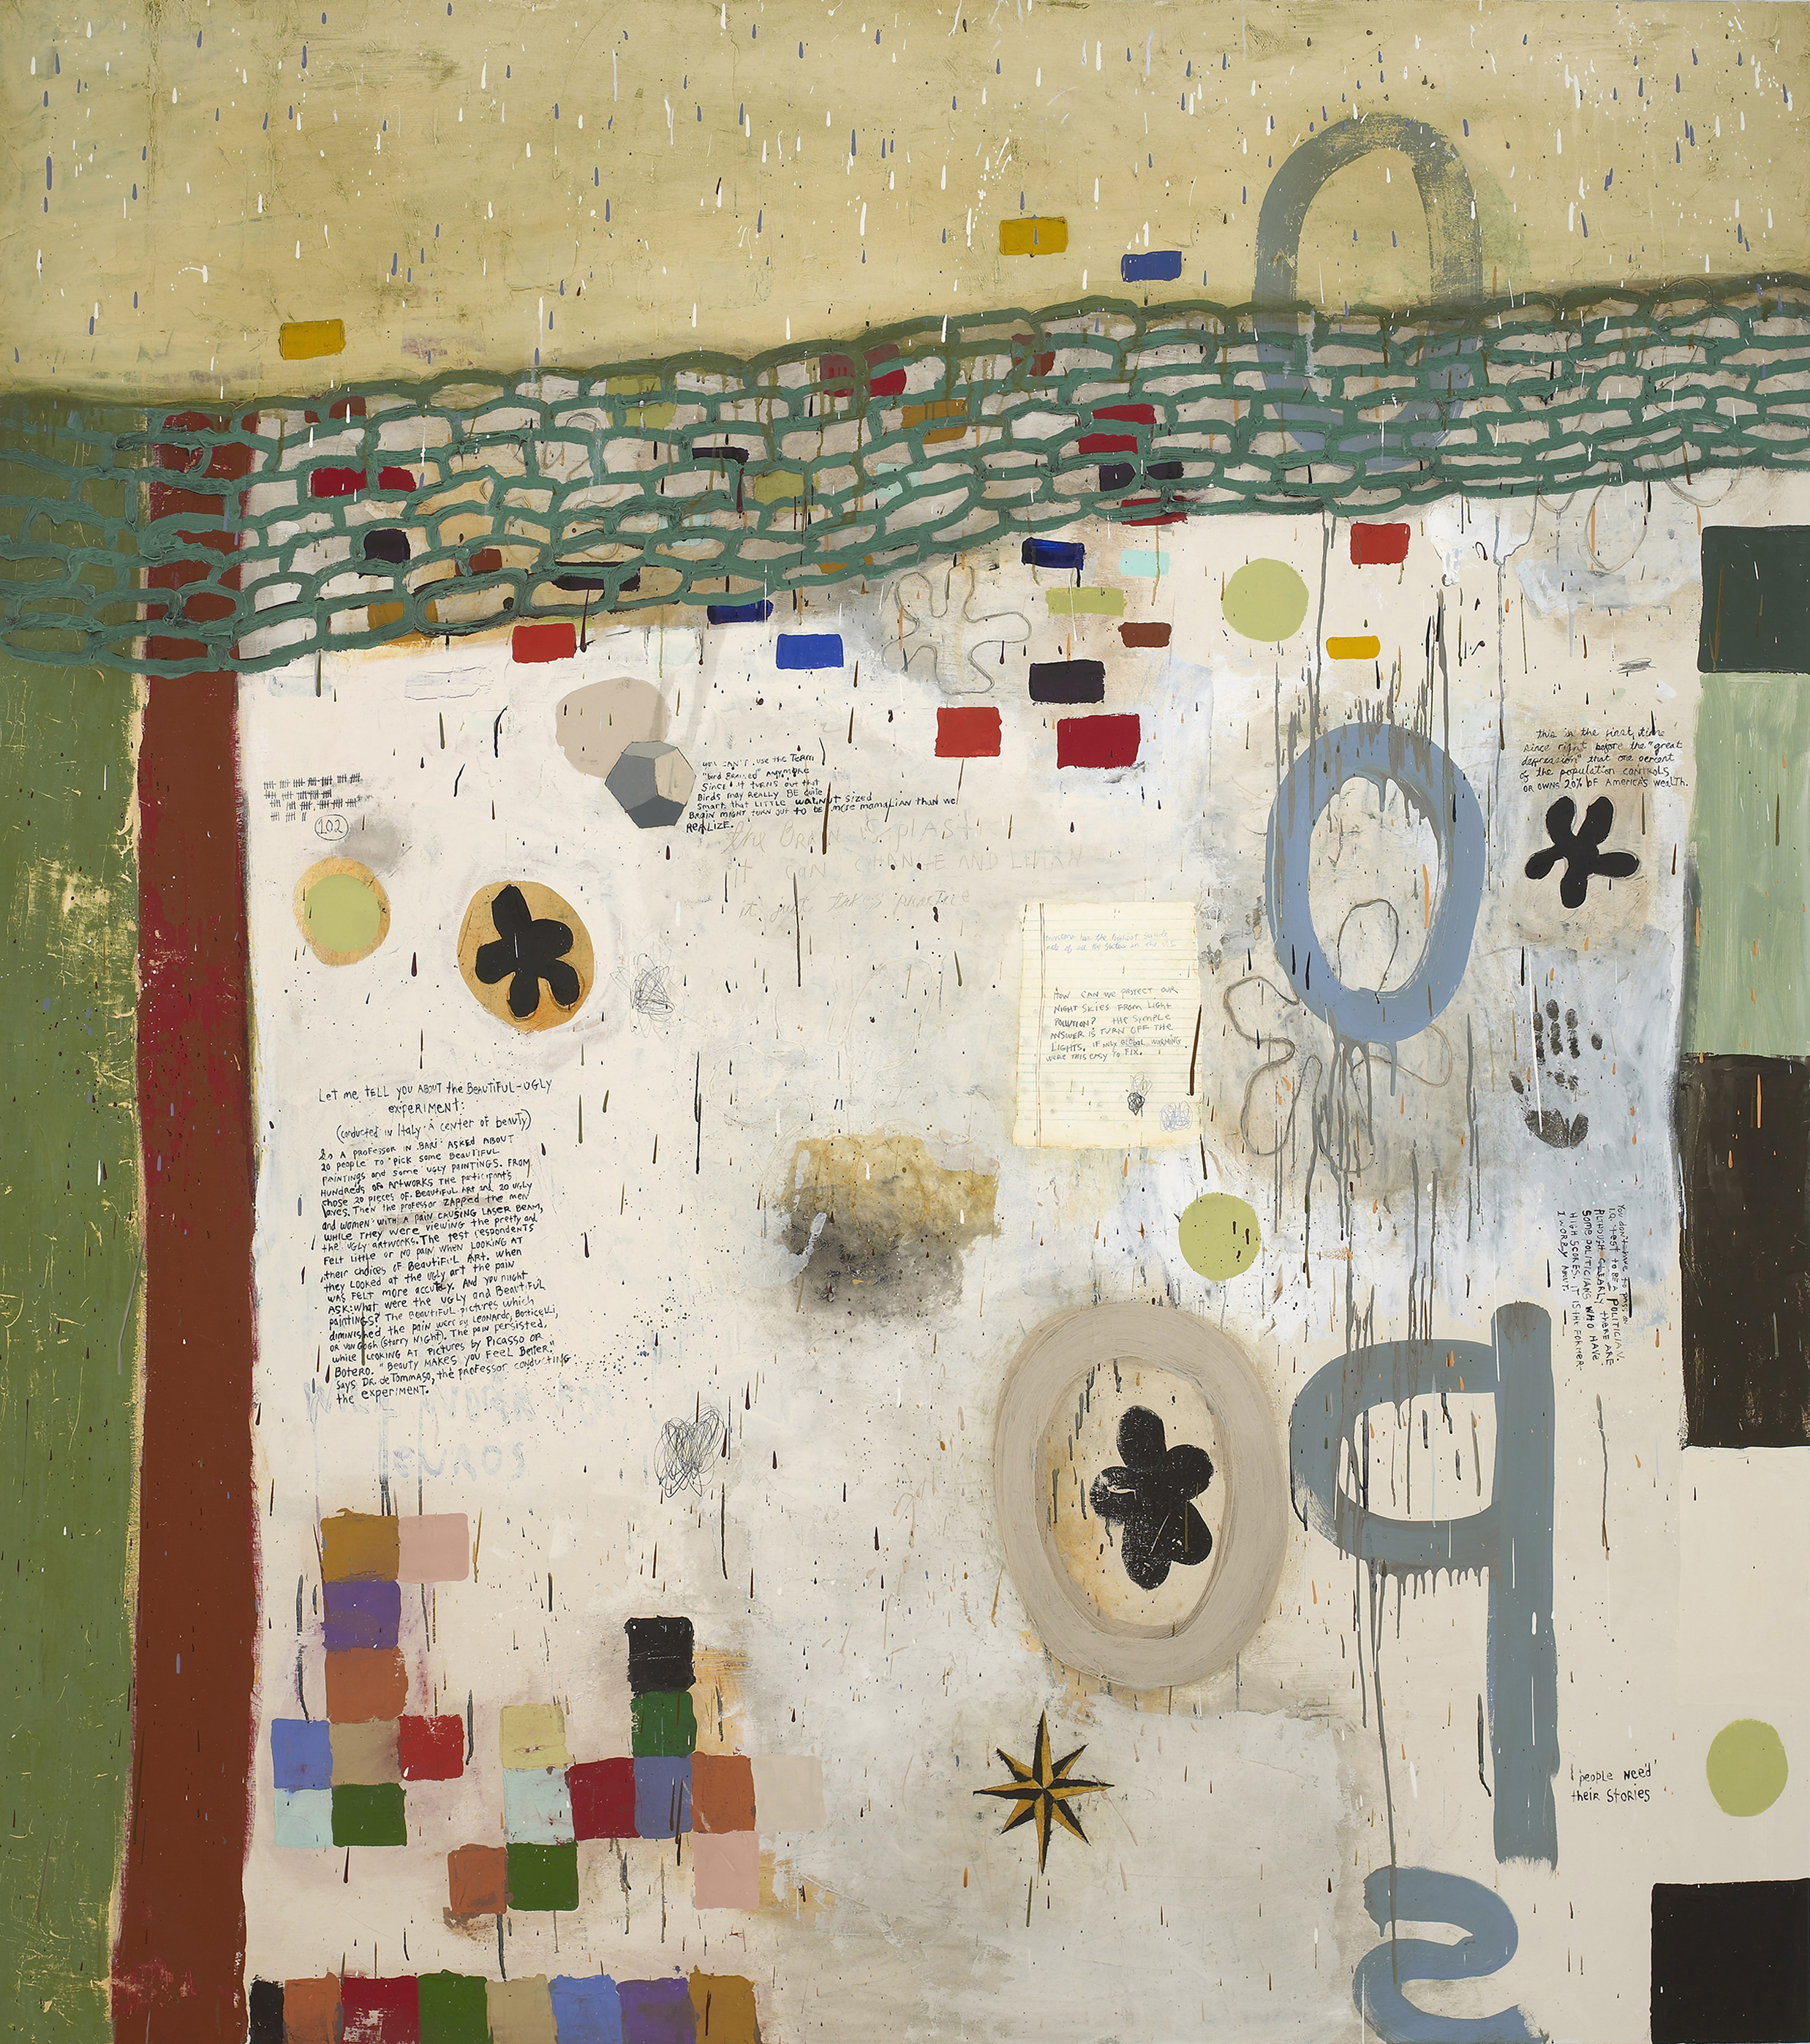   Squeak Carnwath   Beautiful Ugly , 2008 oil and alkyd on canvas over panel 90 x 80 inches 228.6 x 203.2 cm 